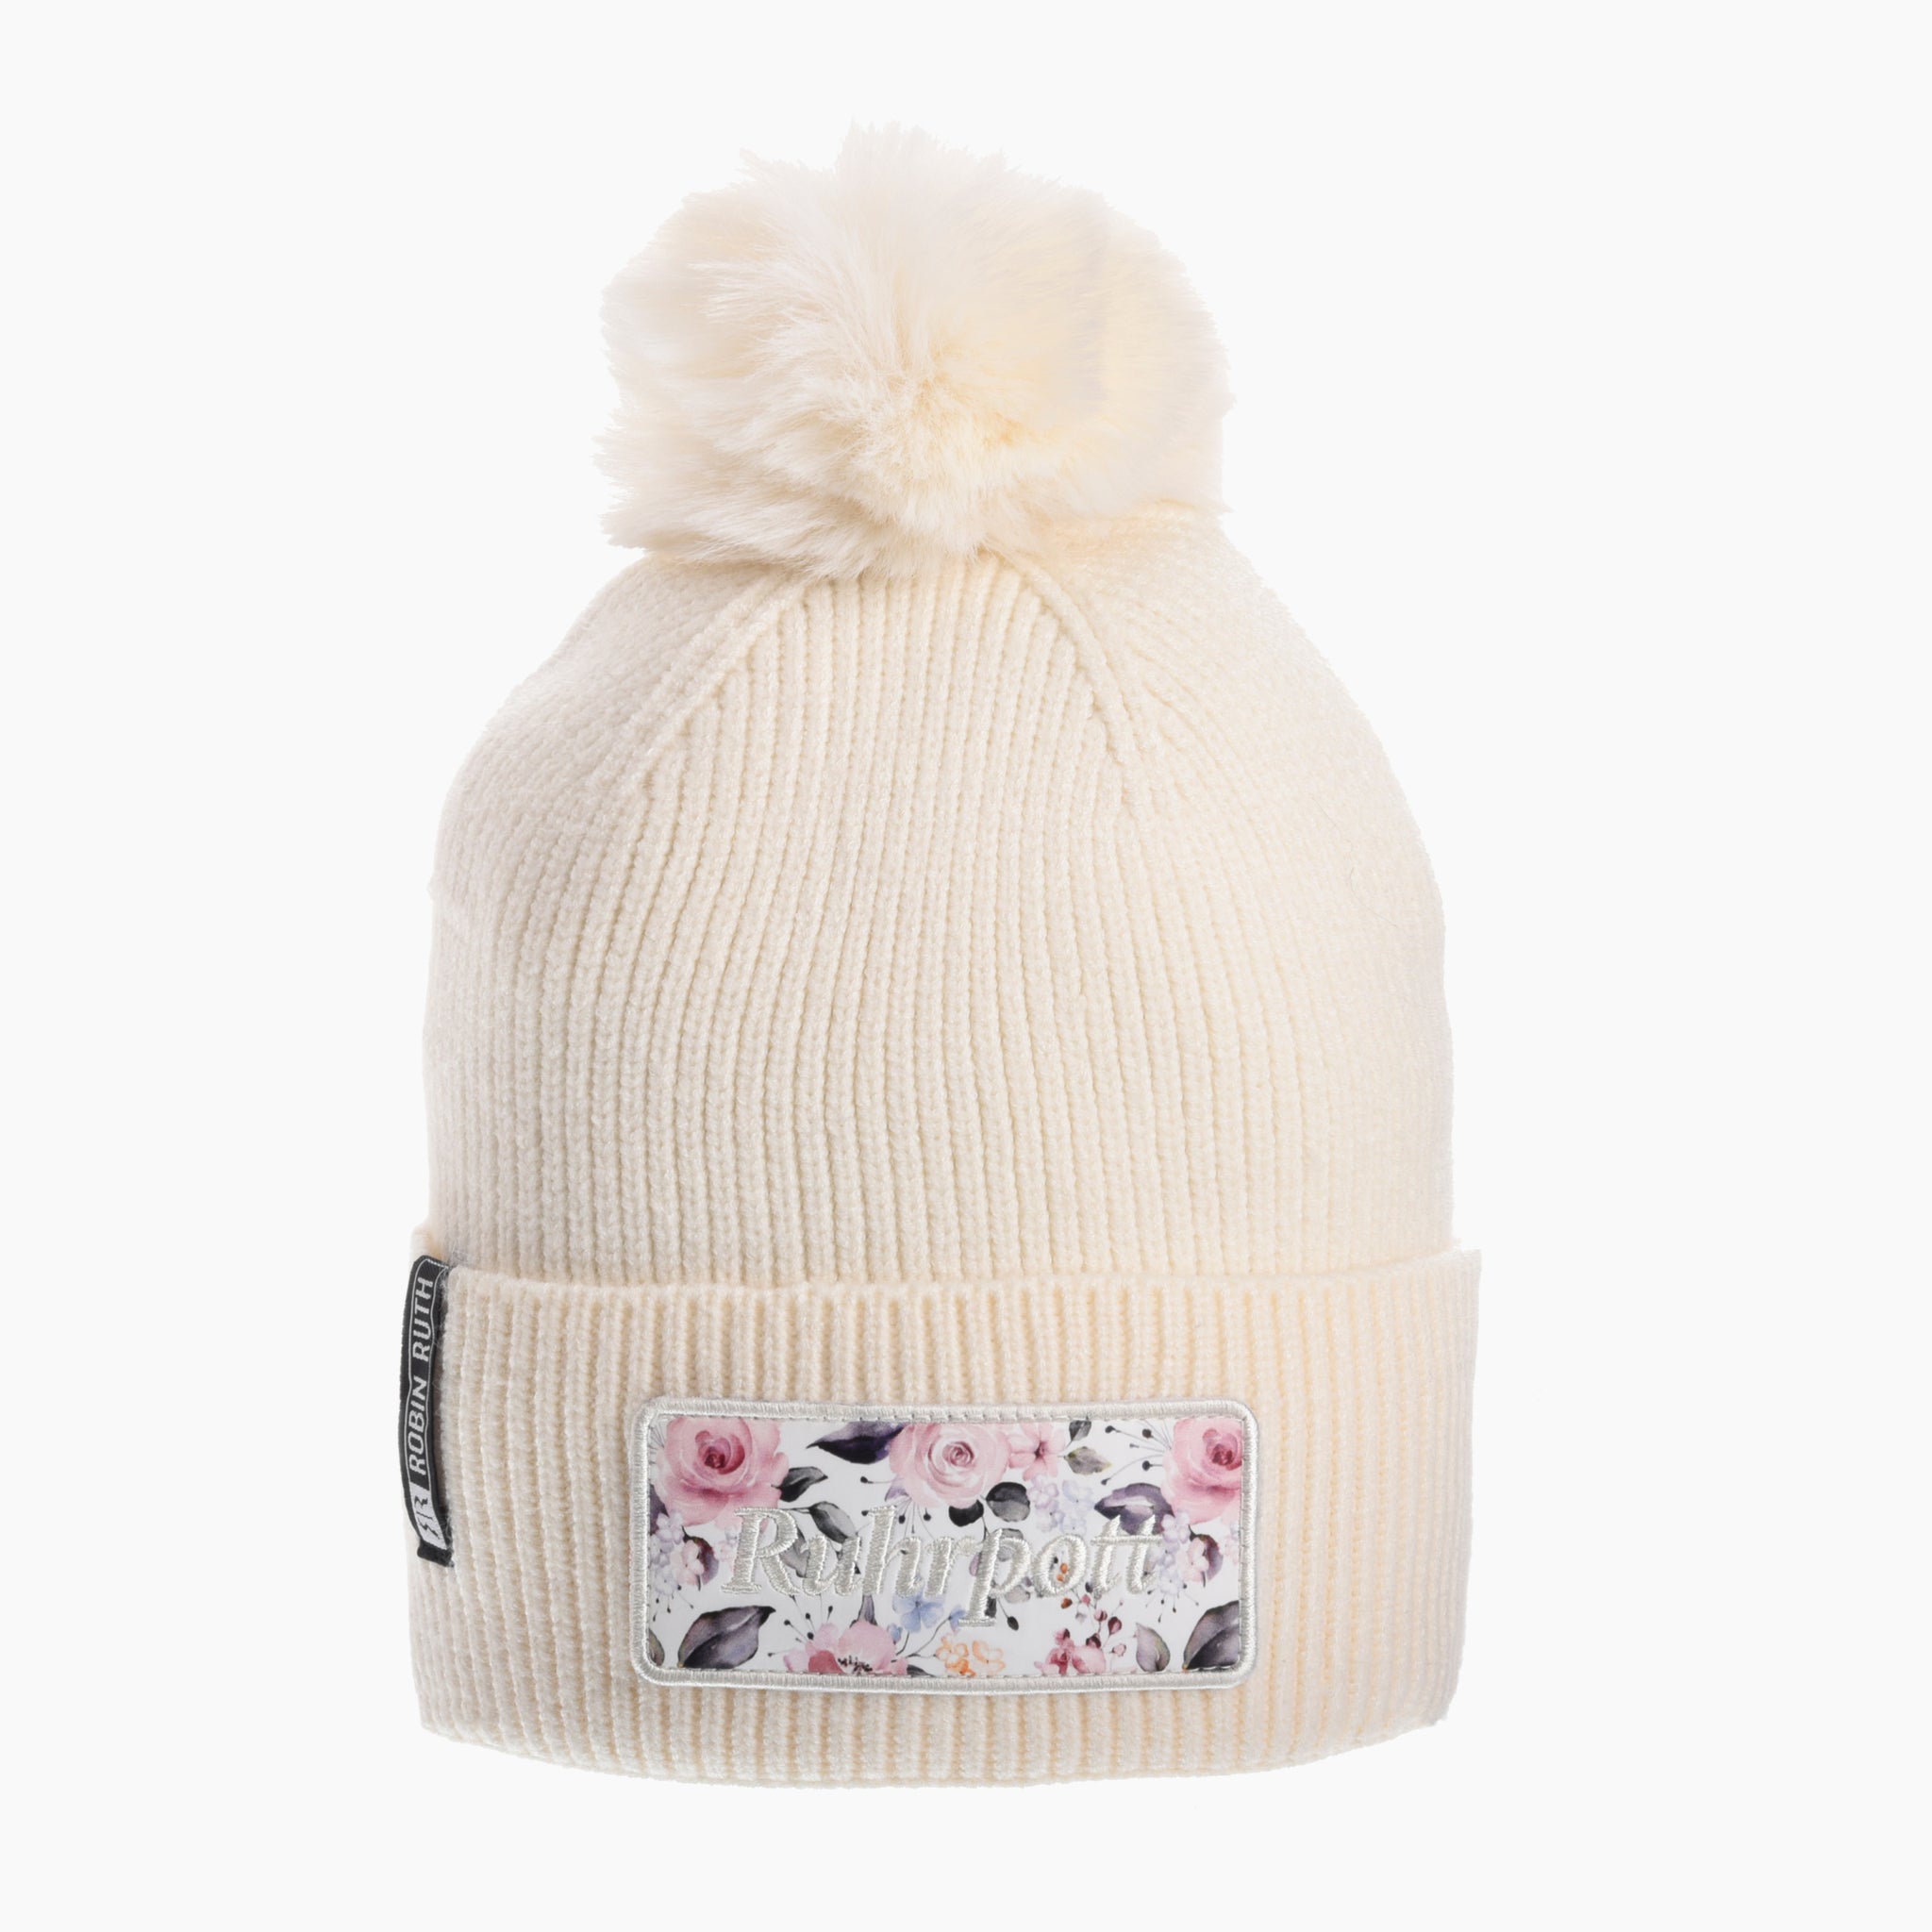 Ruhrpott Winter Hat with Pompon - Robin Ruth